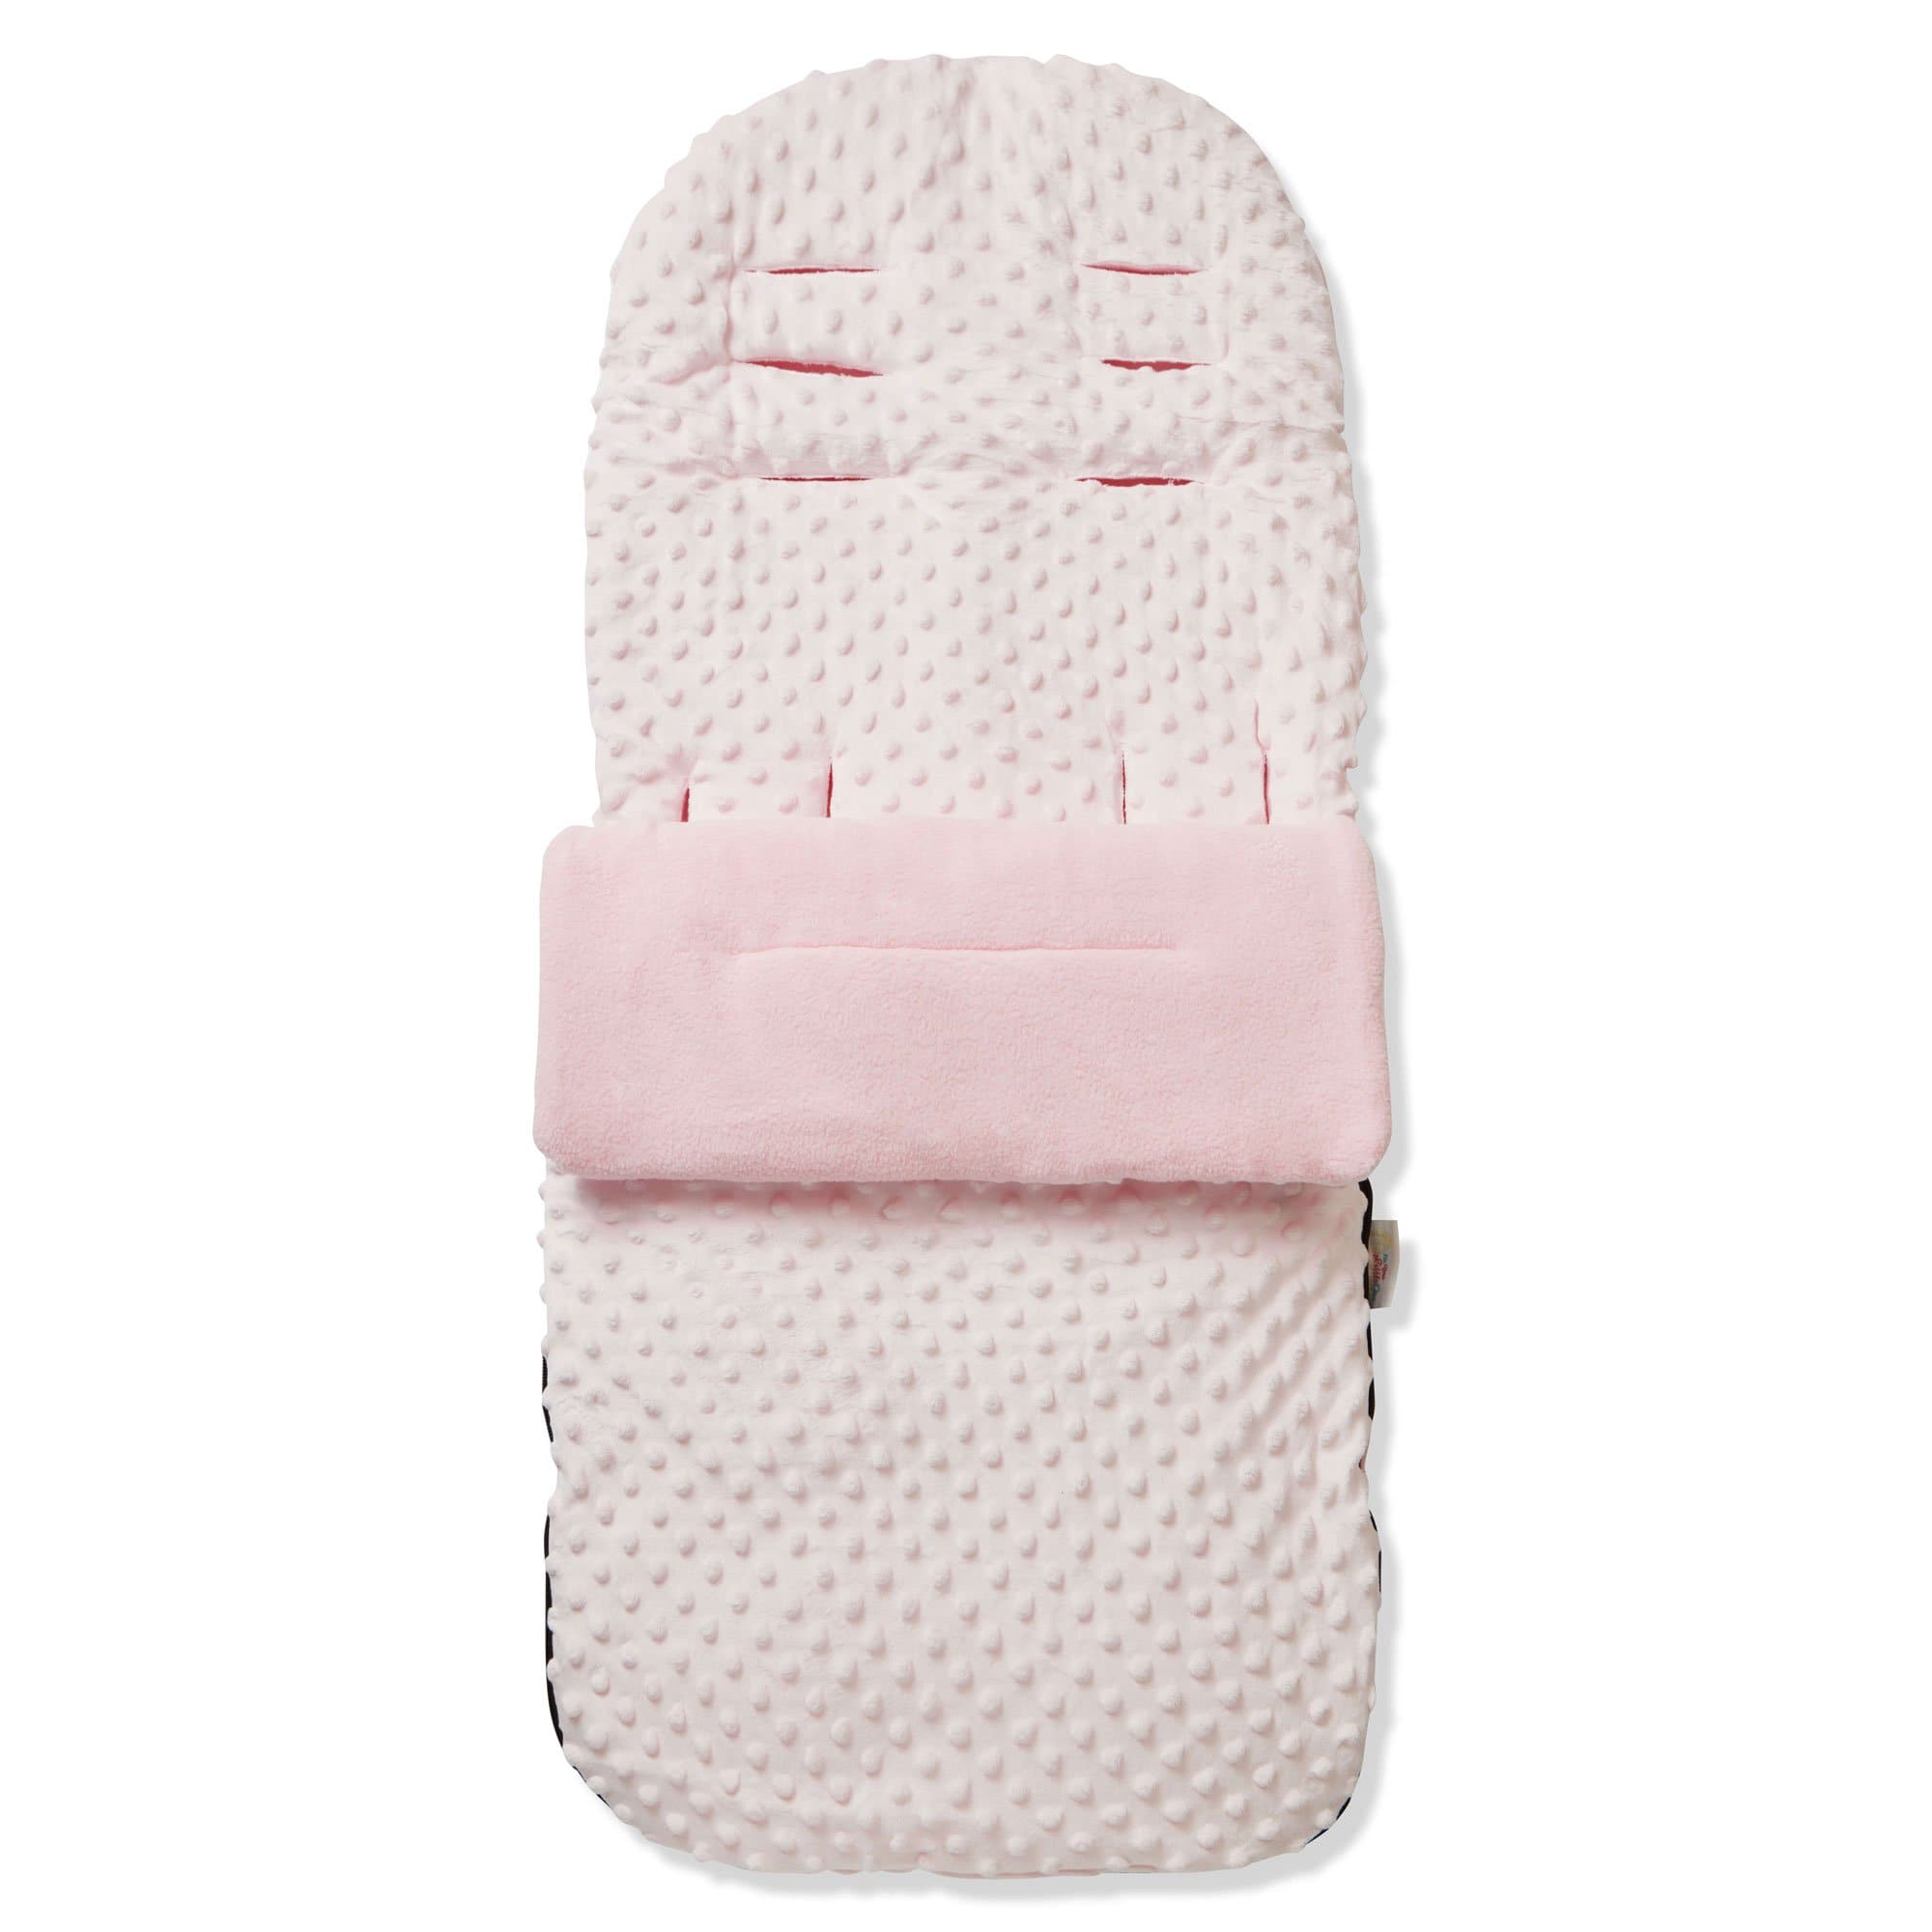 Dimple Footmuff / Cosy Toes Compatible with BabiesRus - Pink / Fits All Models | For Your Little One